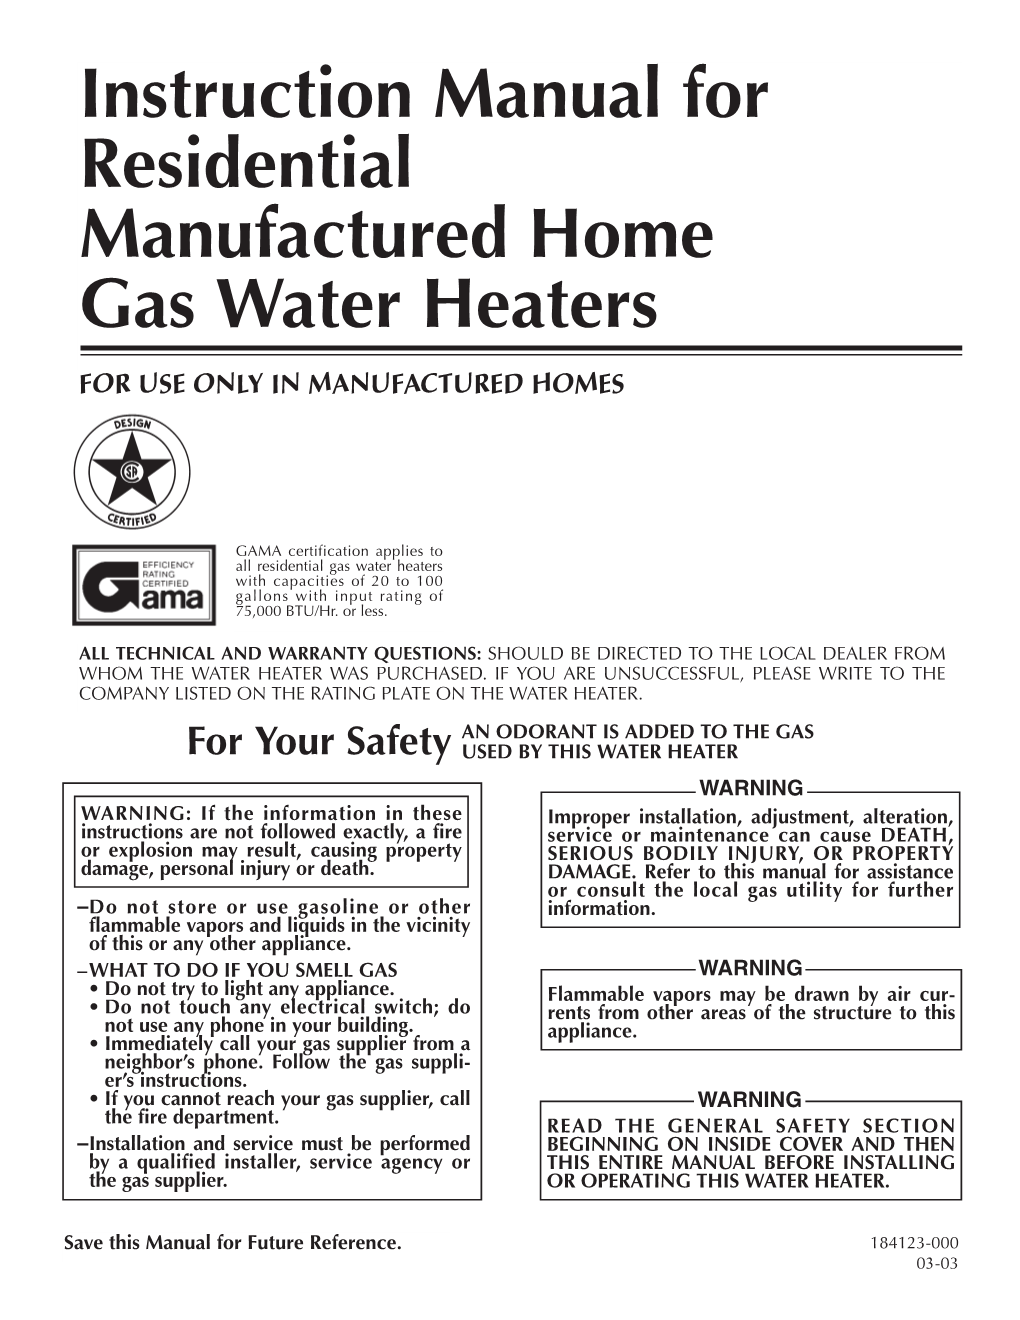 Instruction Manual for Residential Manufactured Home Gas Water Heaters